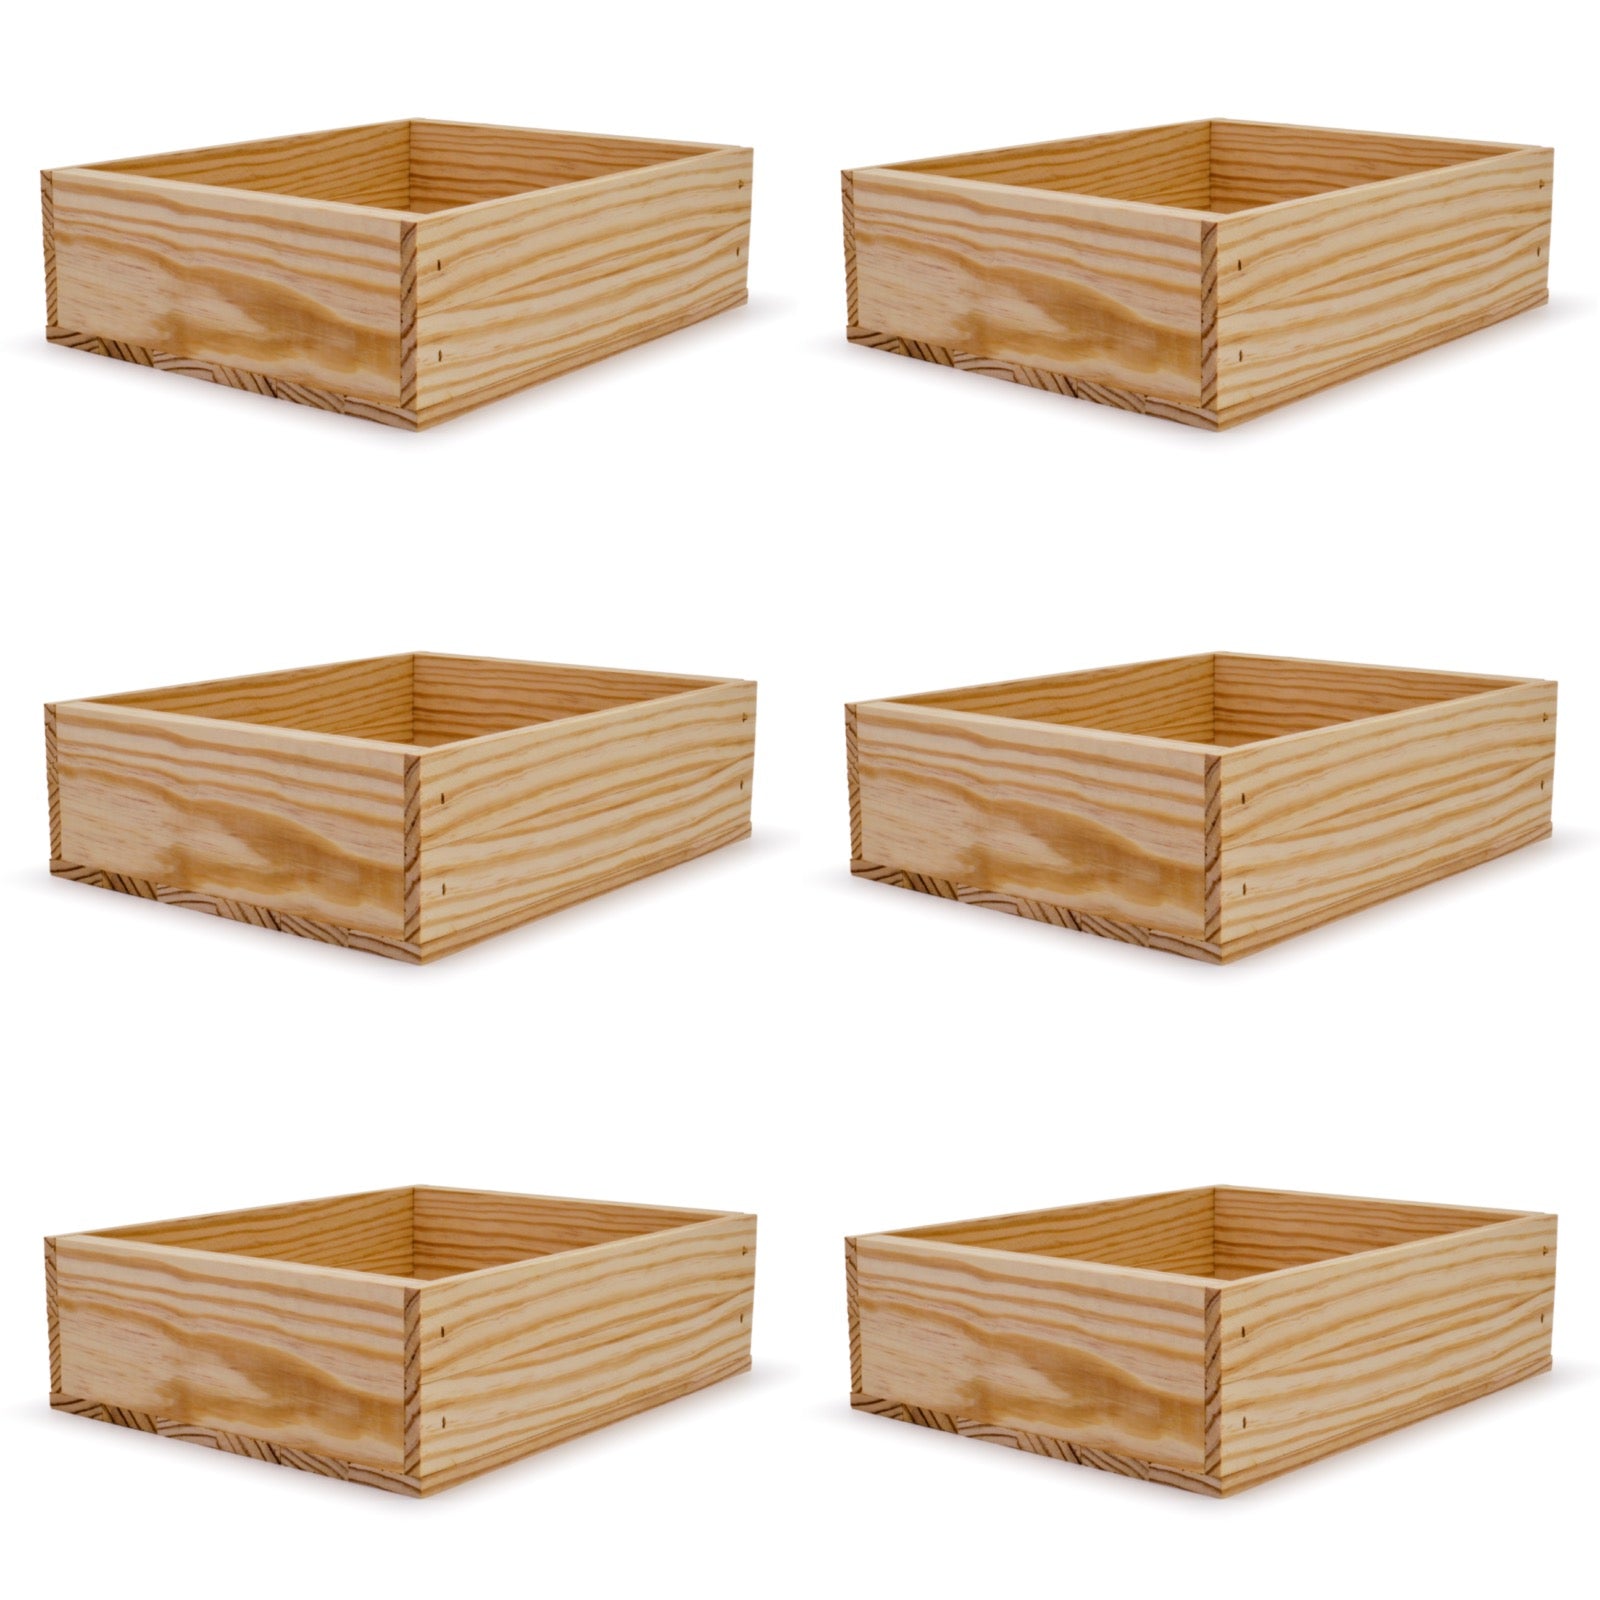 6 Small wooden crates 12x9.75x3.5